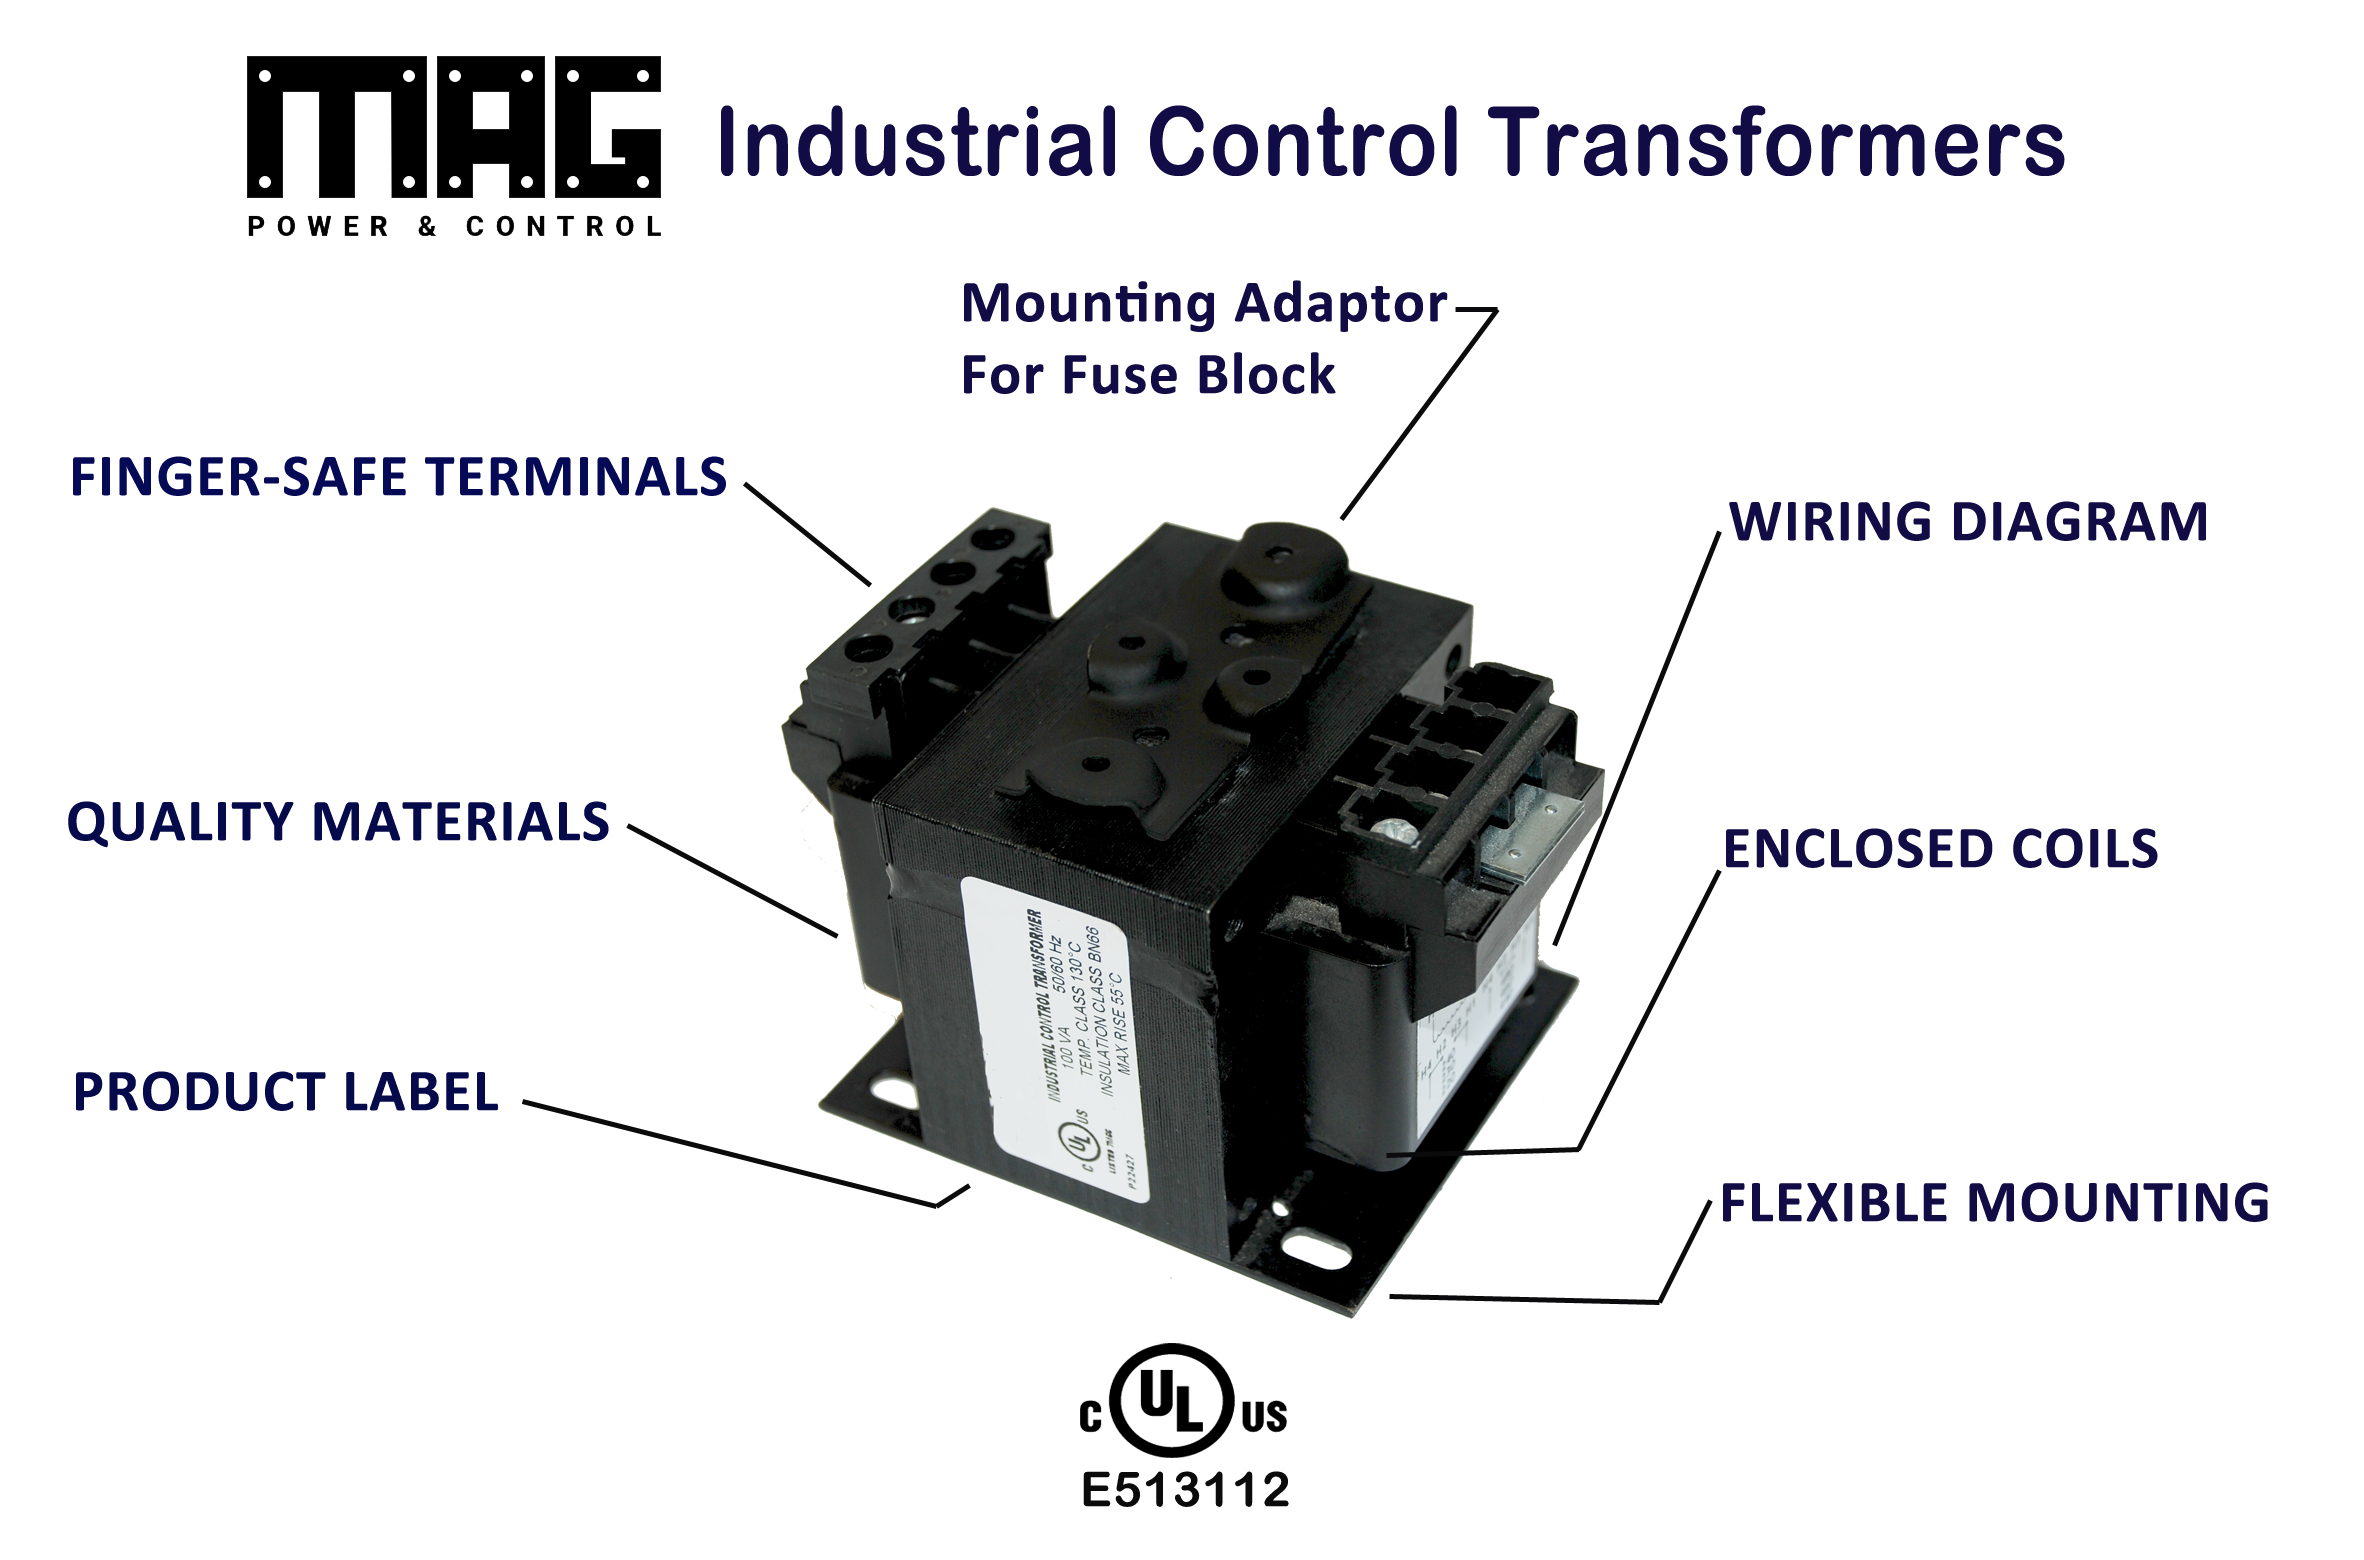 Diagram of transformer with features